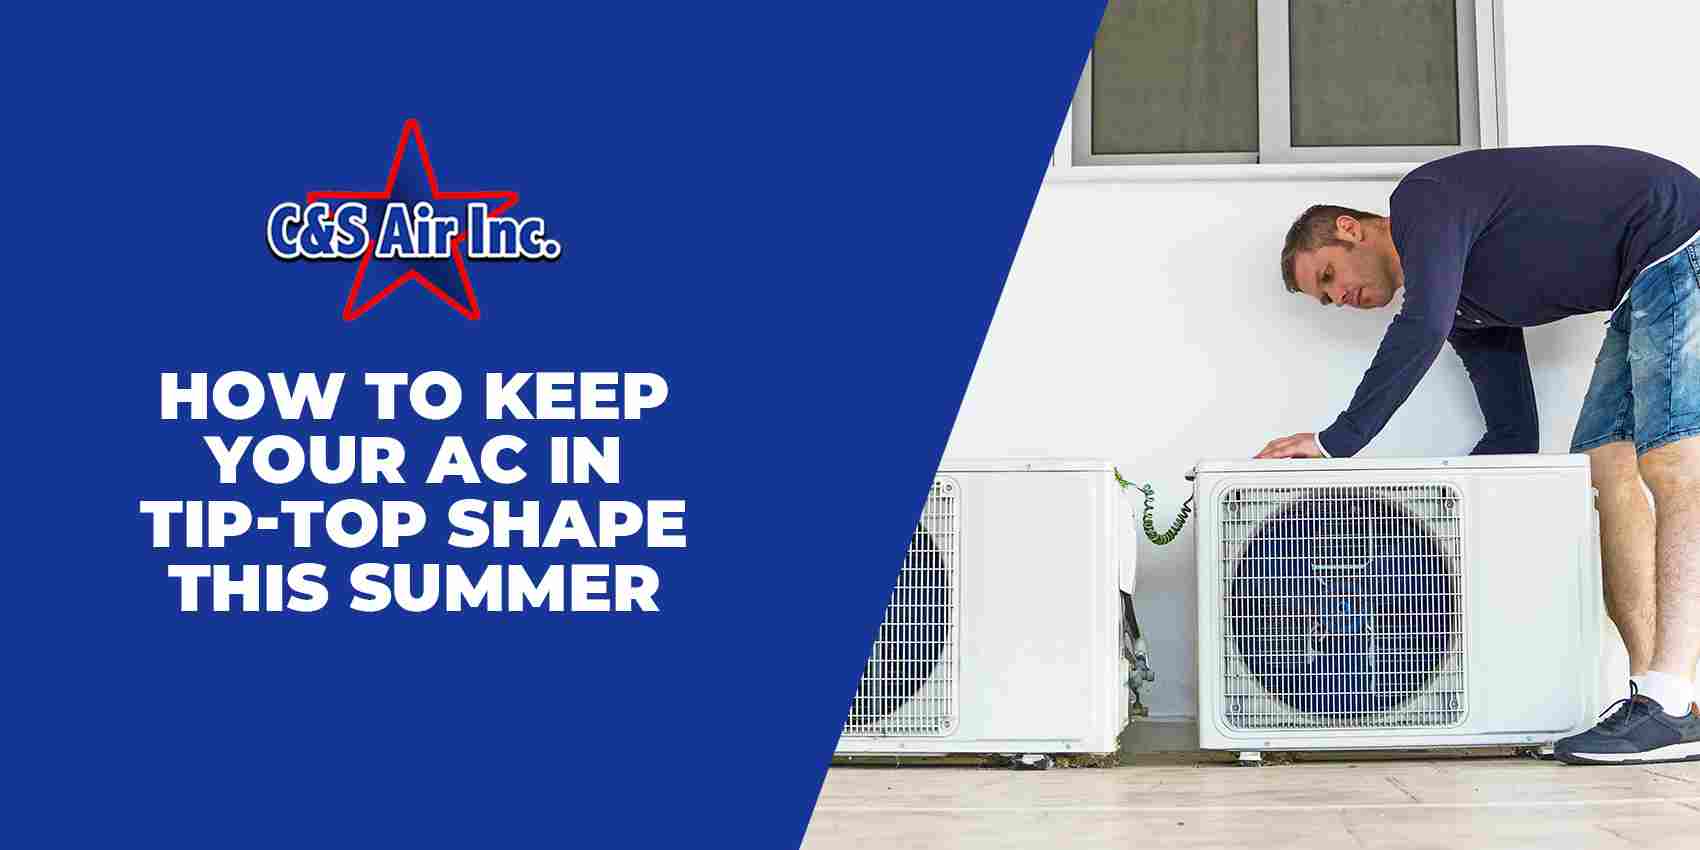 How to Keep Your AC in Tip-Top Shape This Summer